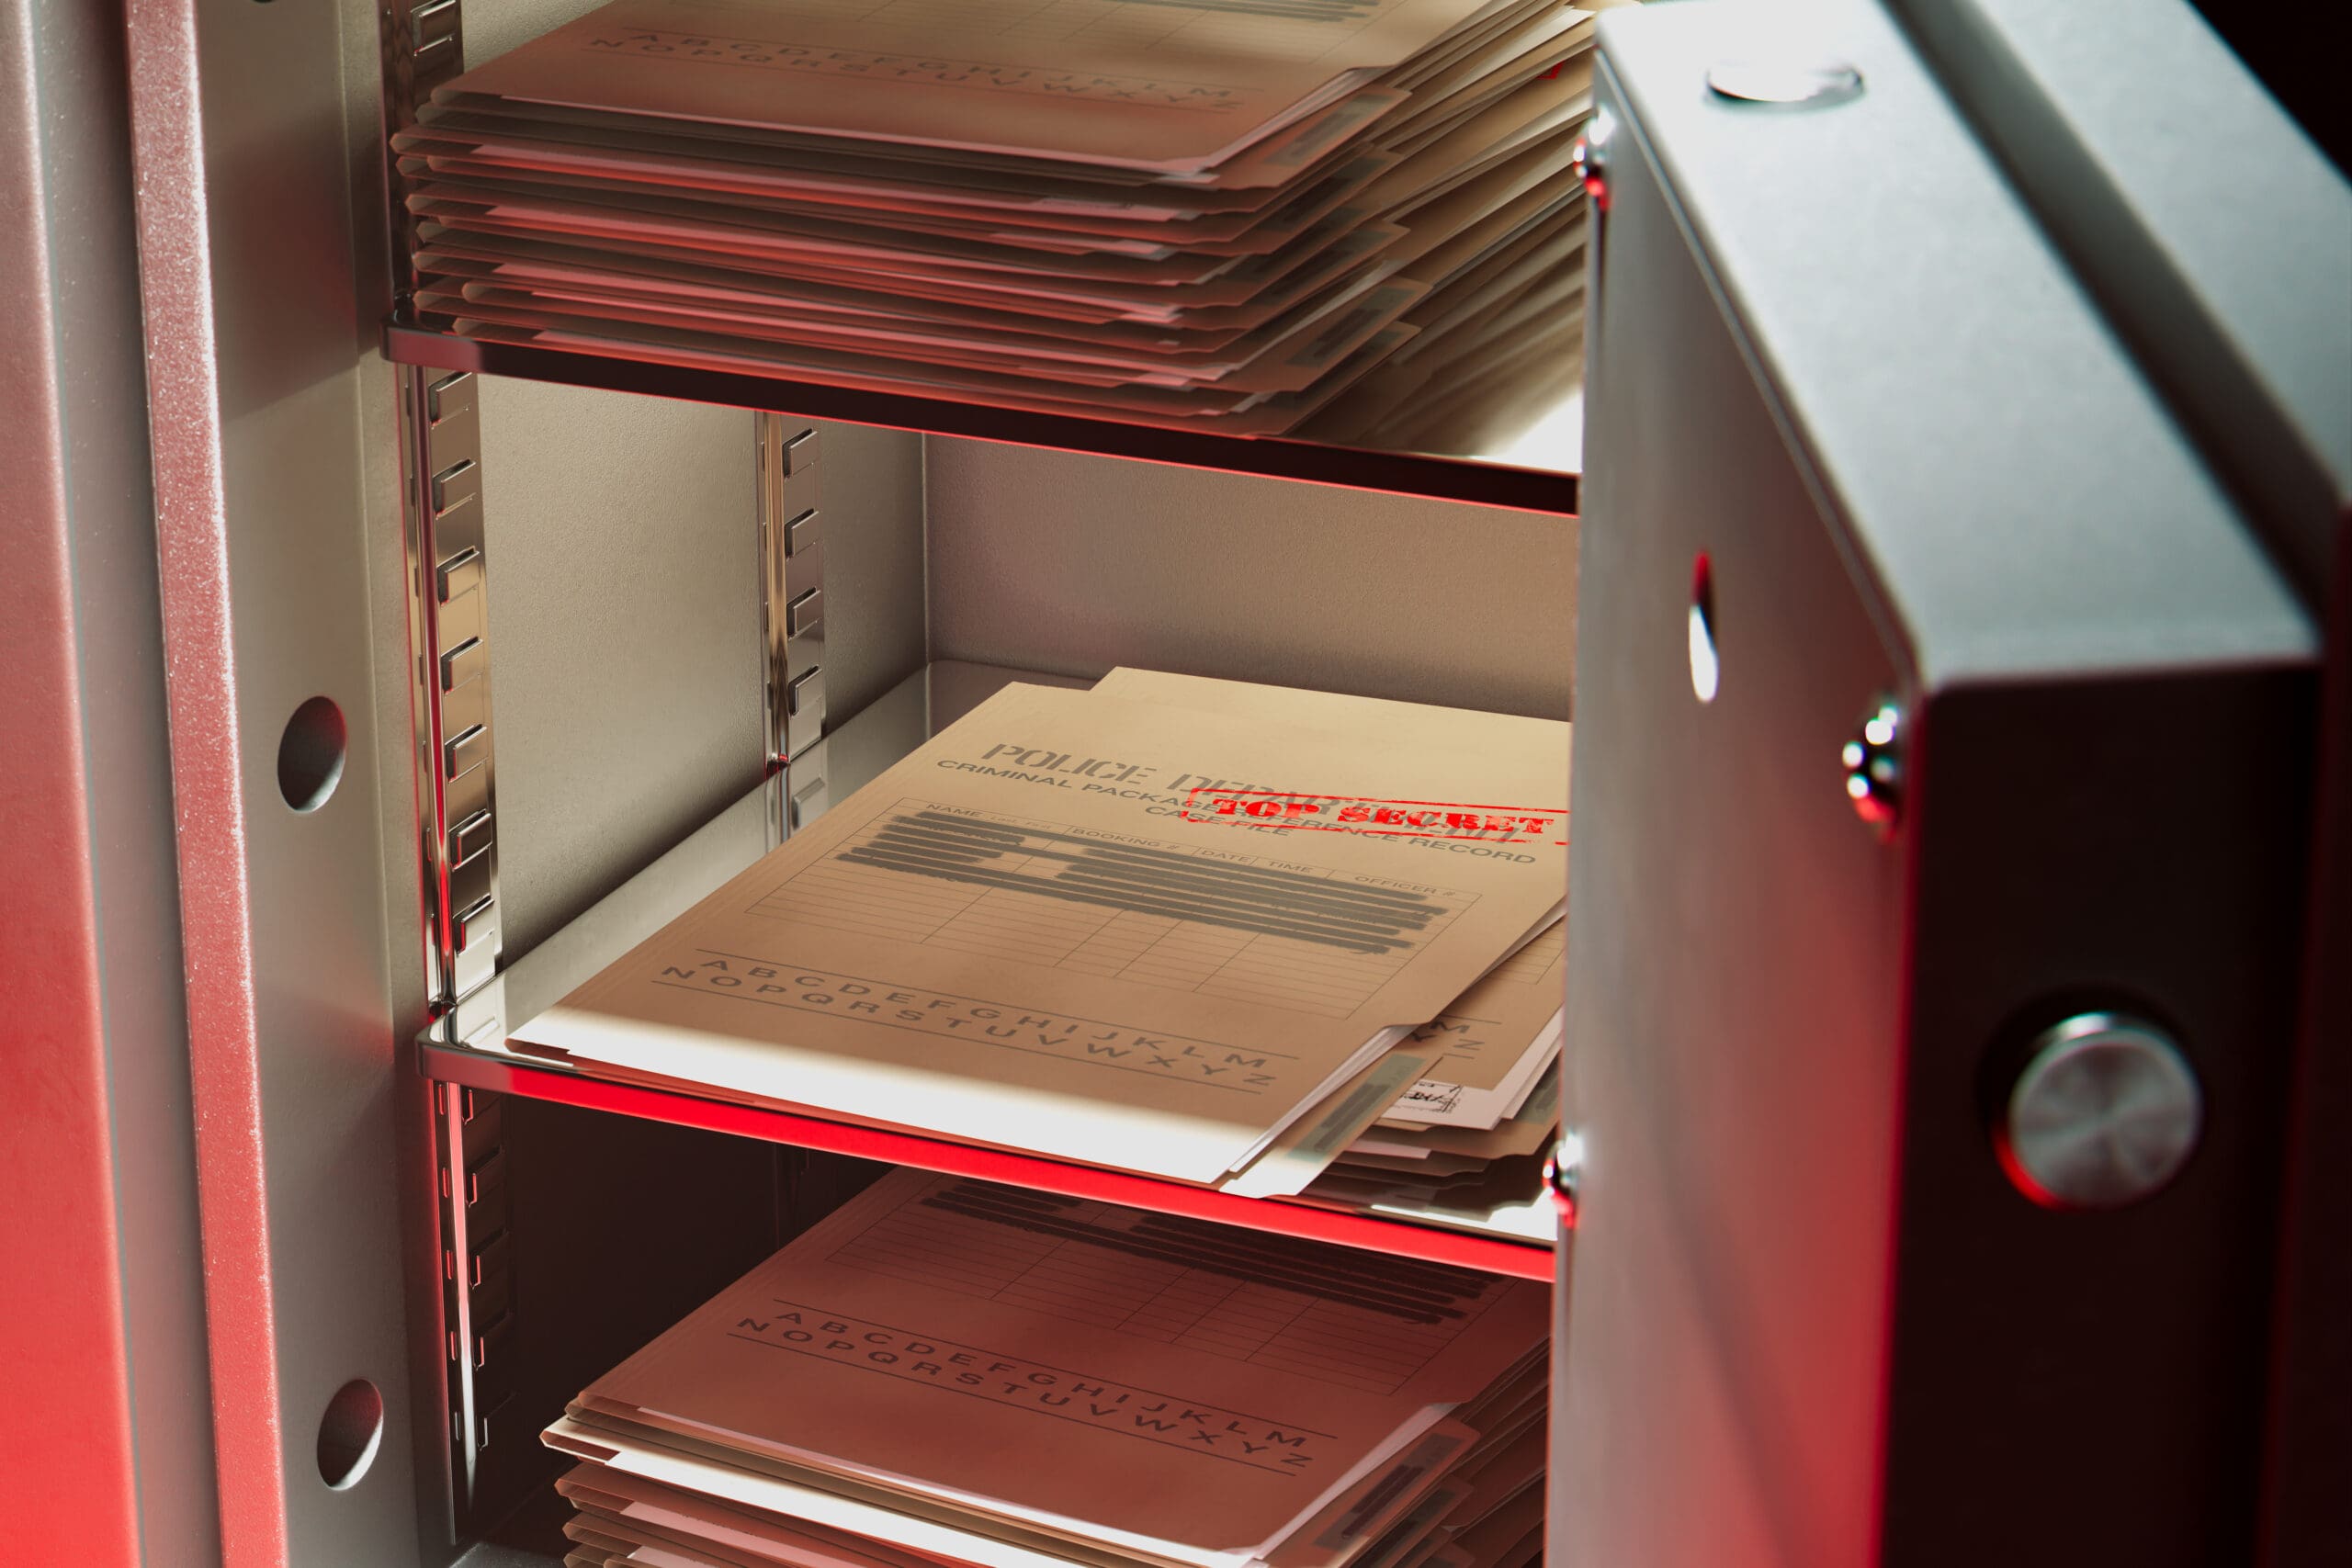 An open file cabinet or safe containing several folders labeled "TOP SECRET." One folder is partially pulled out, revealing documents inside. The scene is illuminated by a red light, casting a dramatic glow on the papers.